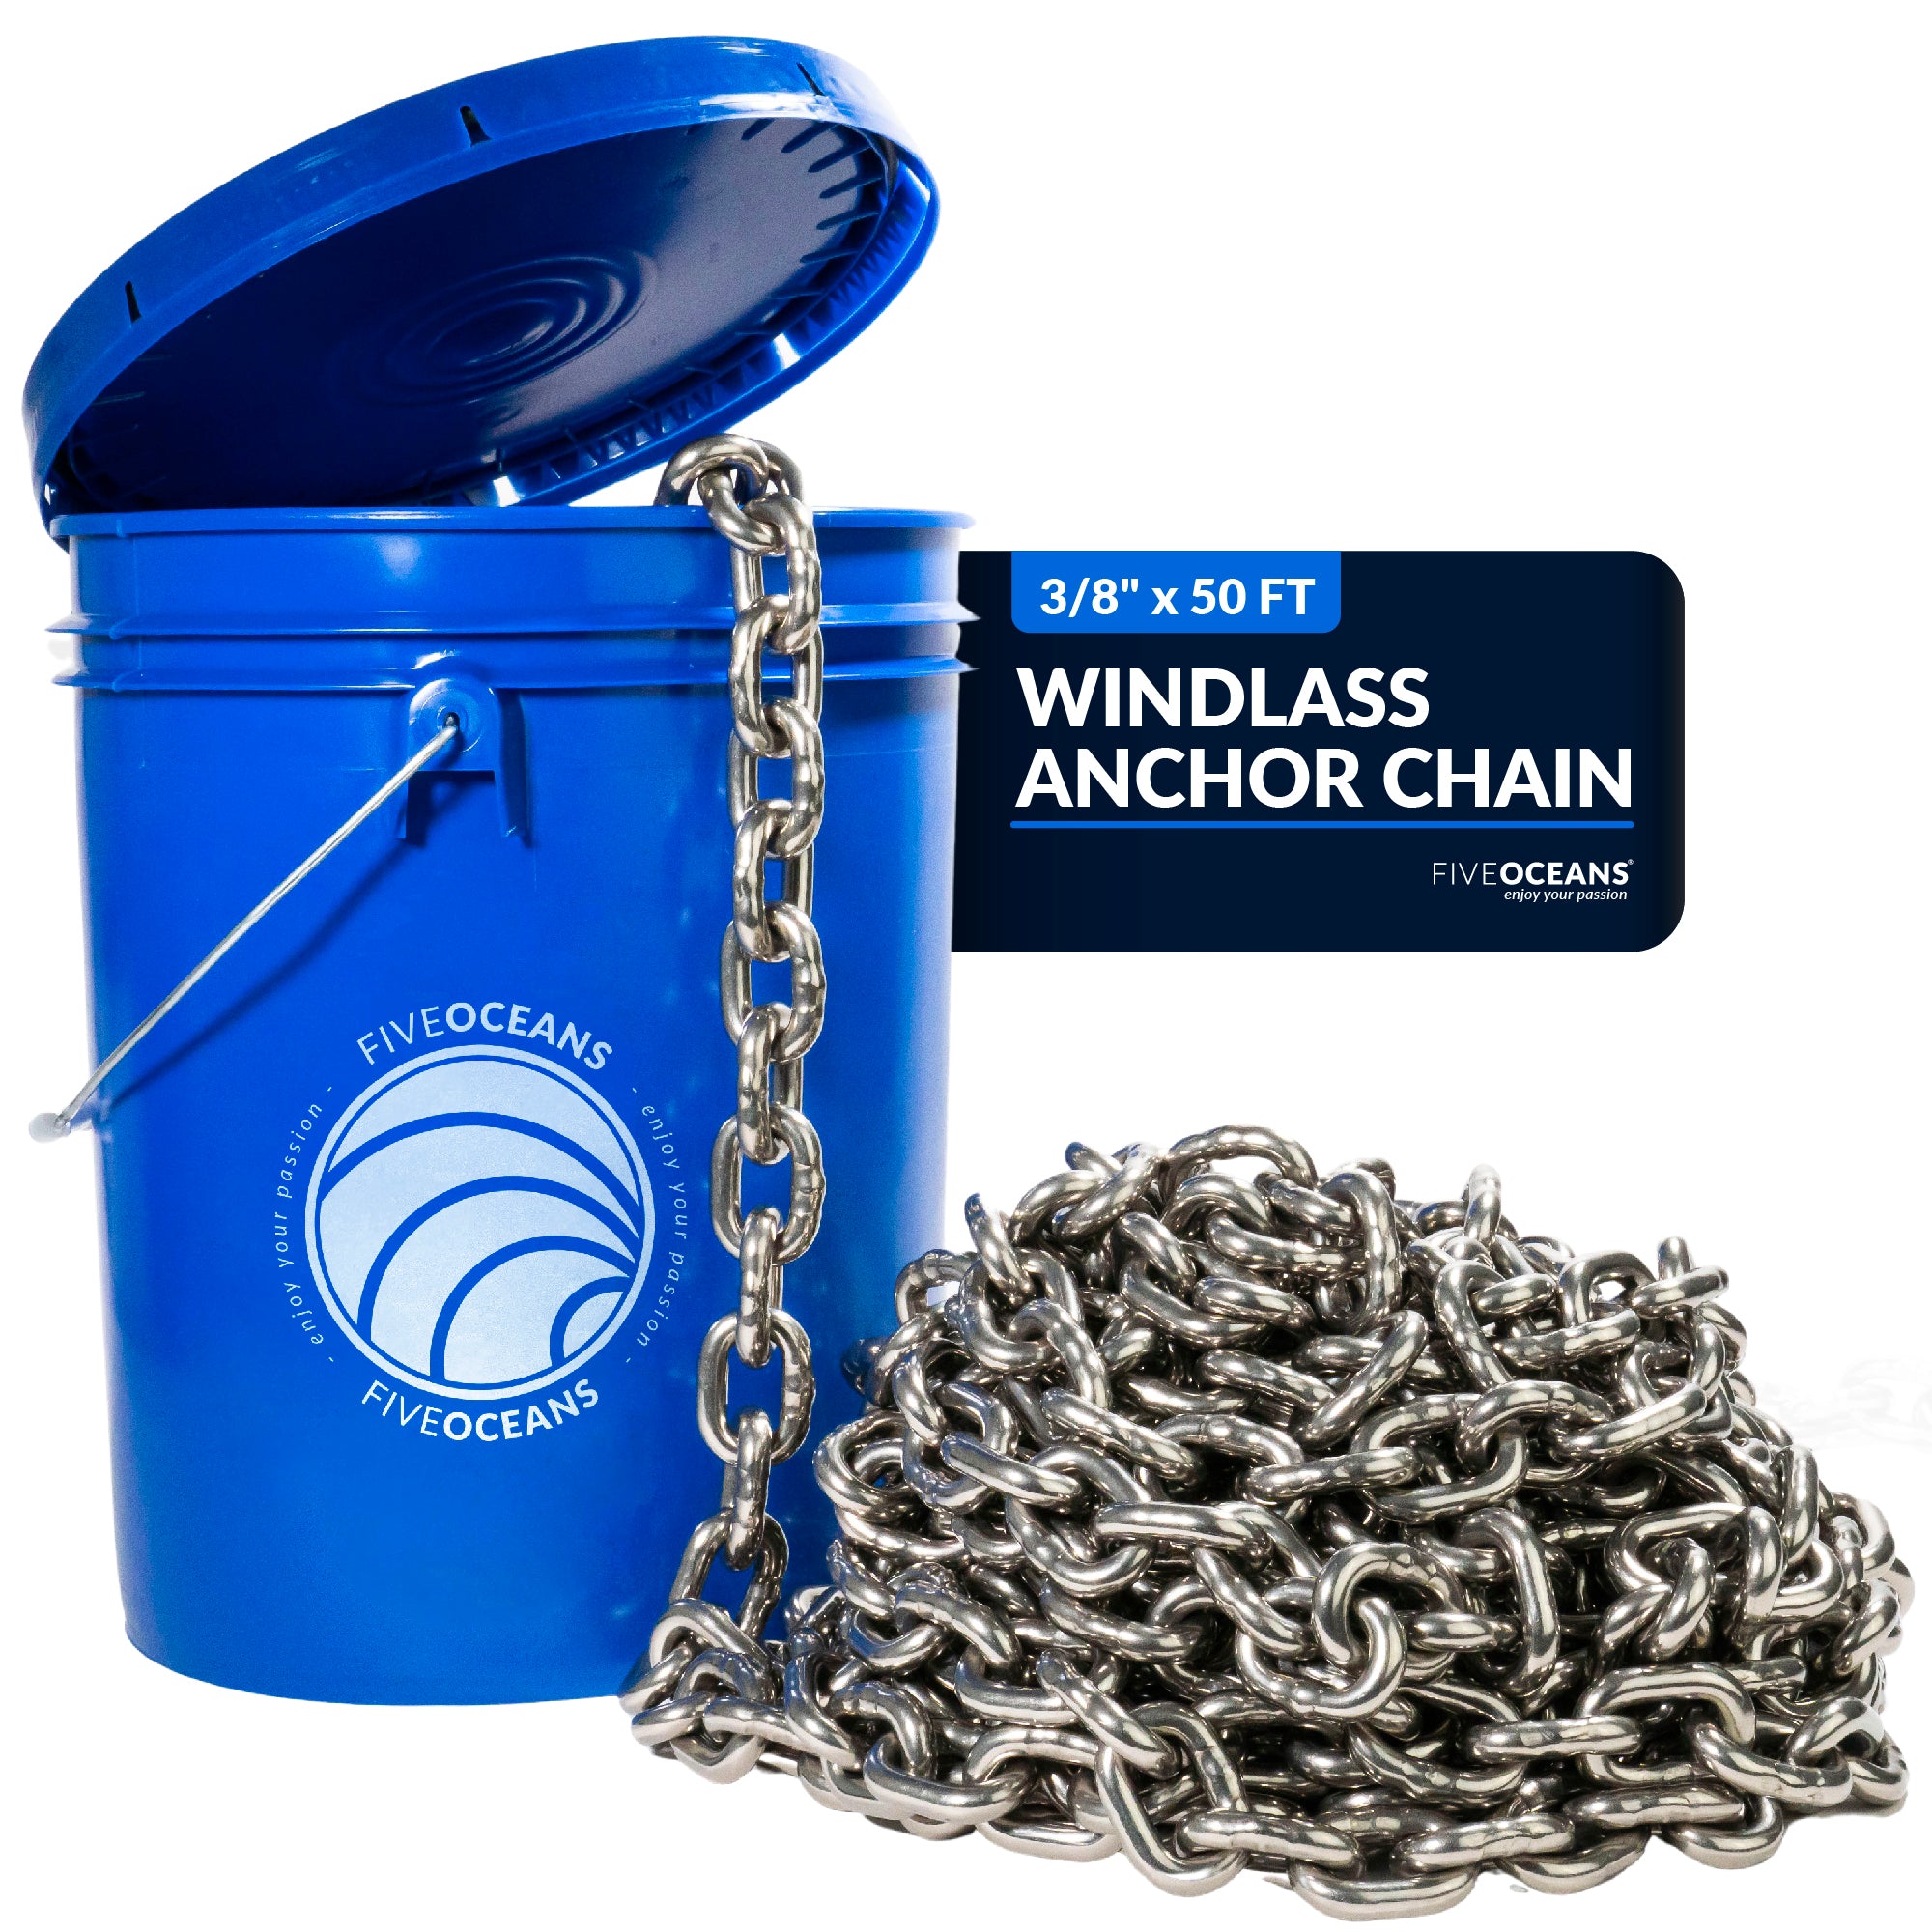 3/8" x 50' Boat Windlass Anchor Chain HT G4 Stainless Steel - FO4494-M50